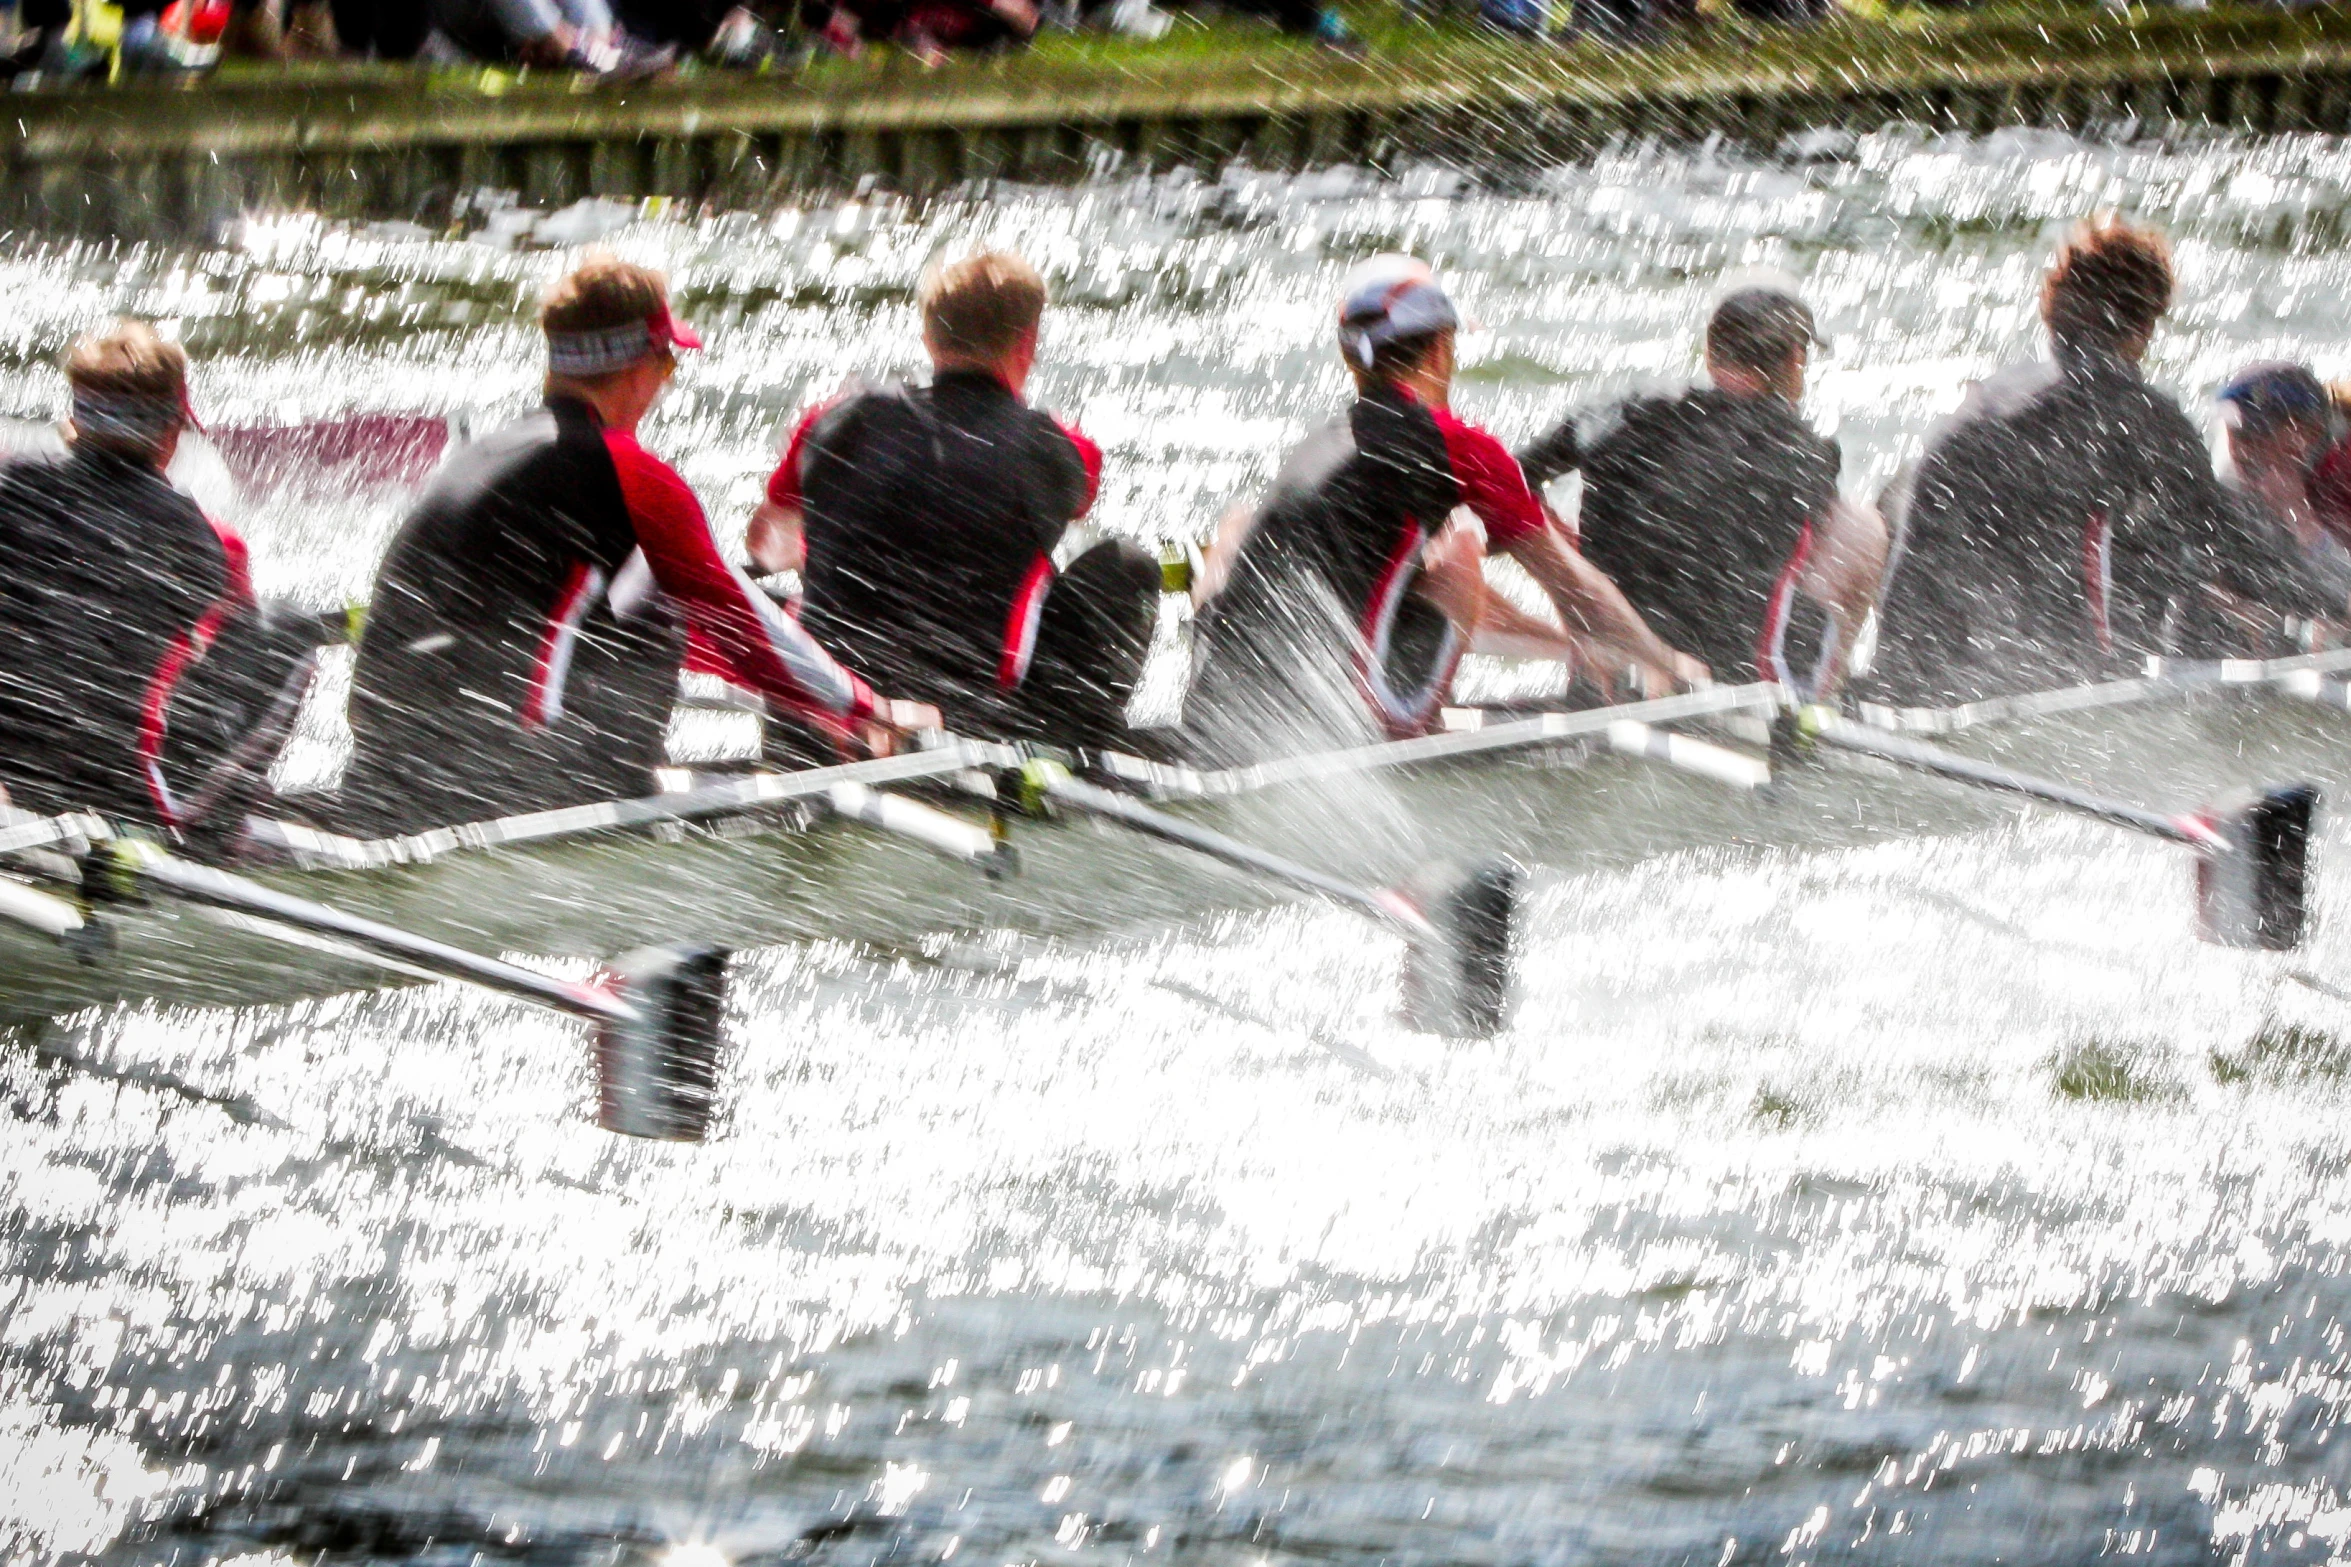 several rowers rowing on water near a crowd